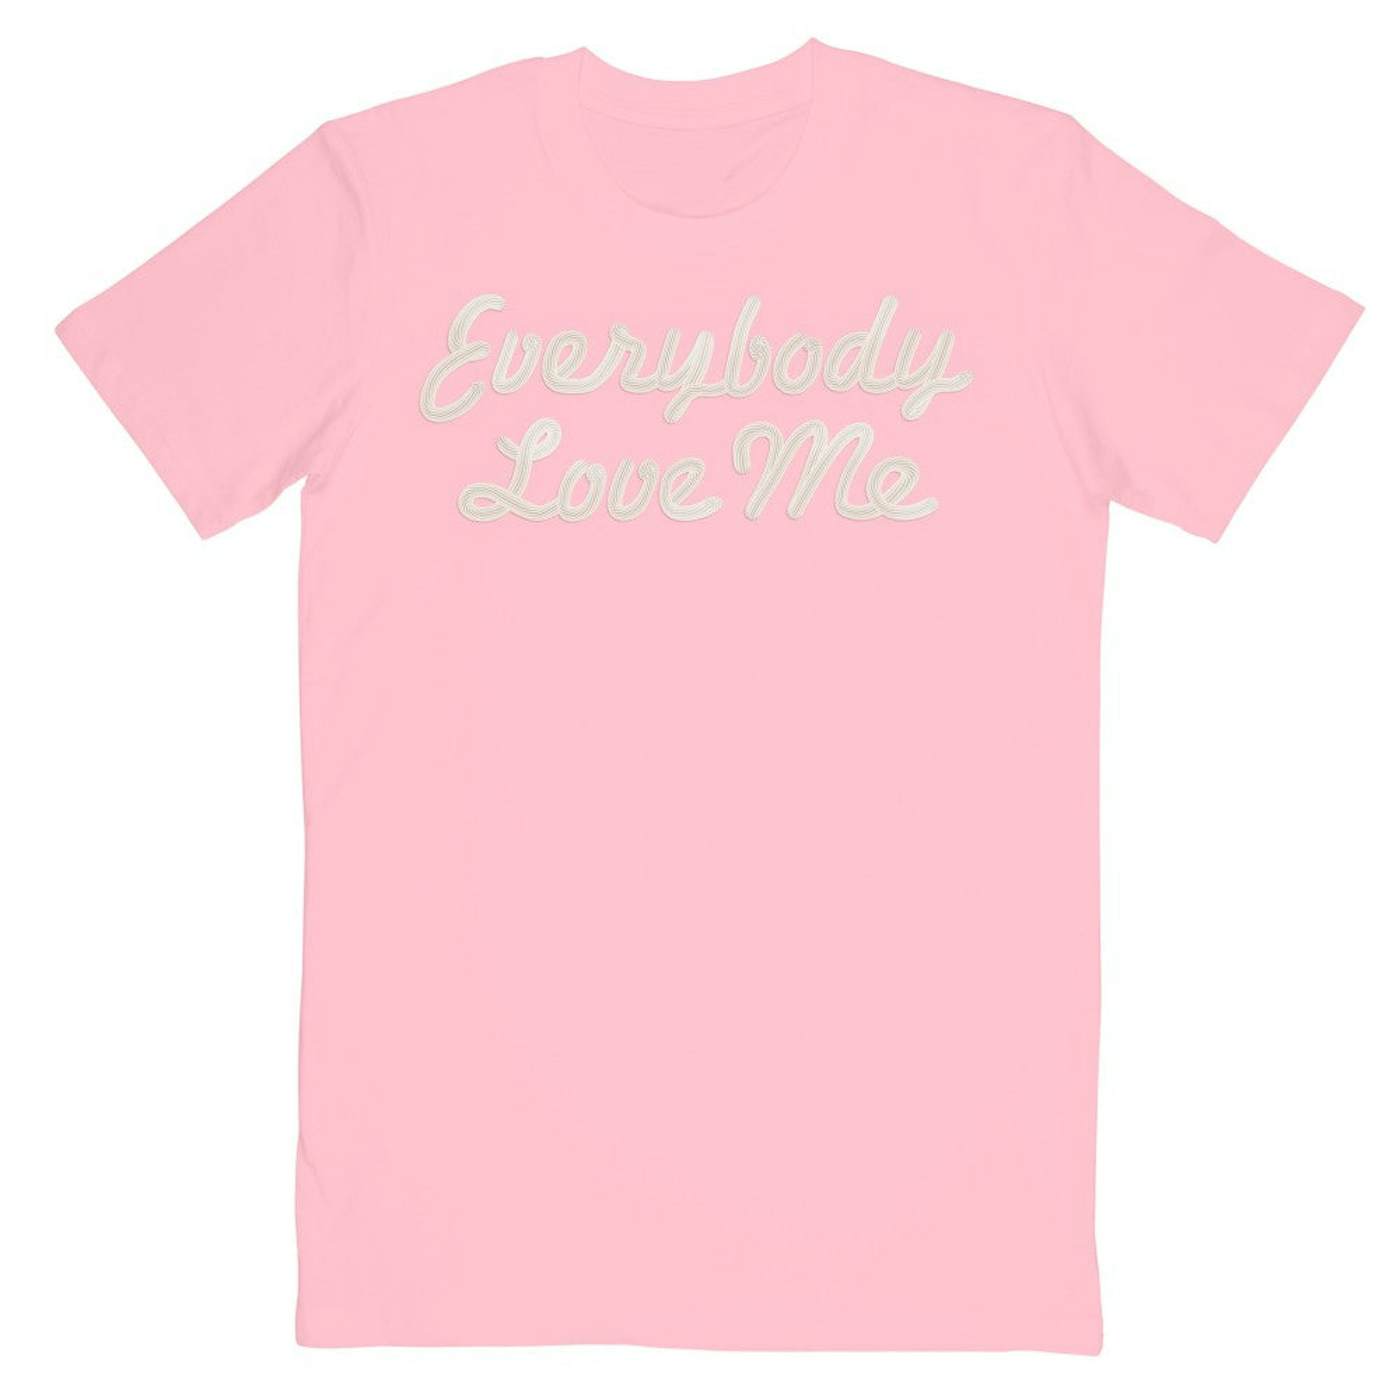 Anne-Marie Everybody Love Me T-Shirt Pink